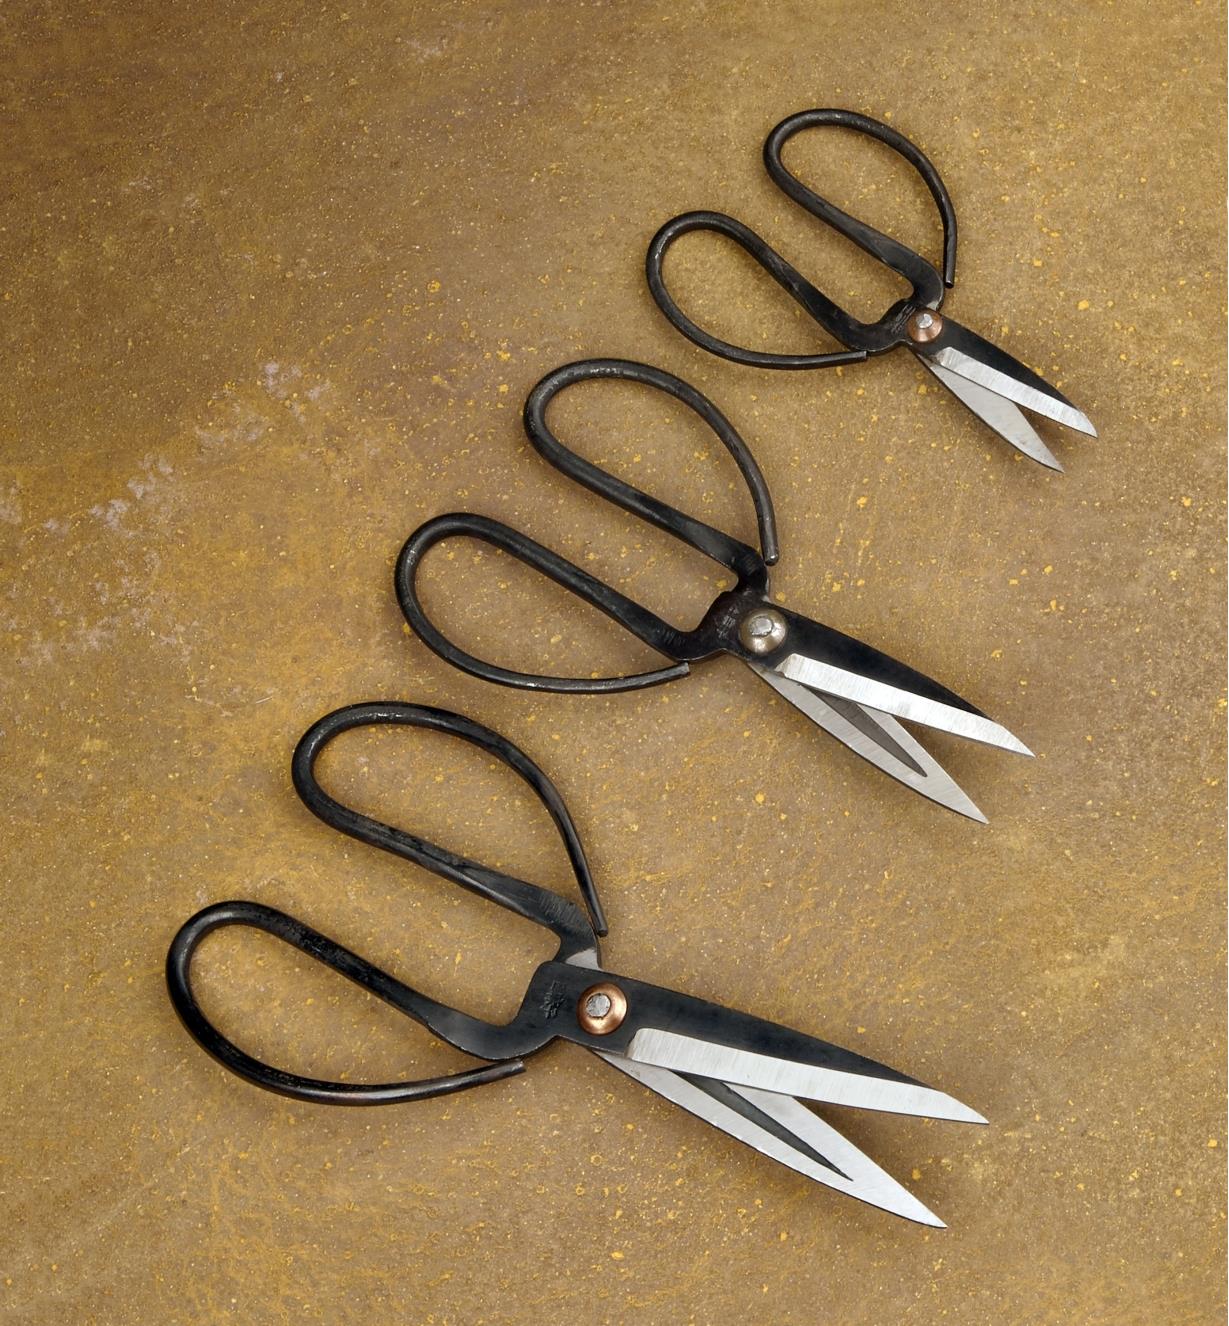 45K1012 - Set of 3 Traditional Chinese Scissors